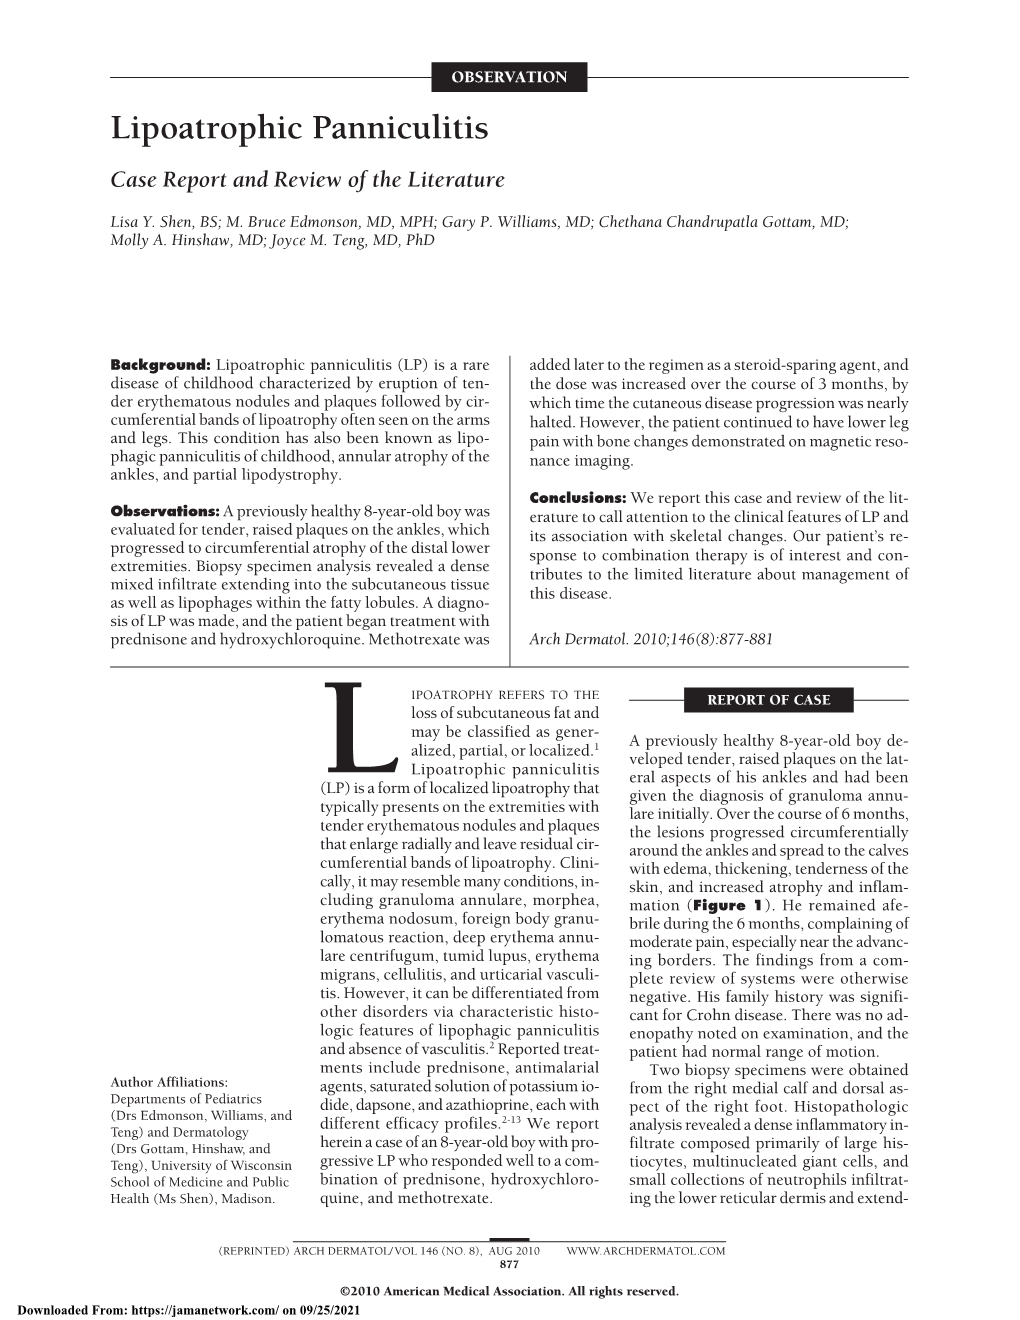 Lipoatrophic Panniculitis Case Report and Review of the Literature